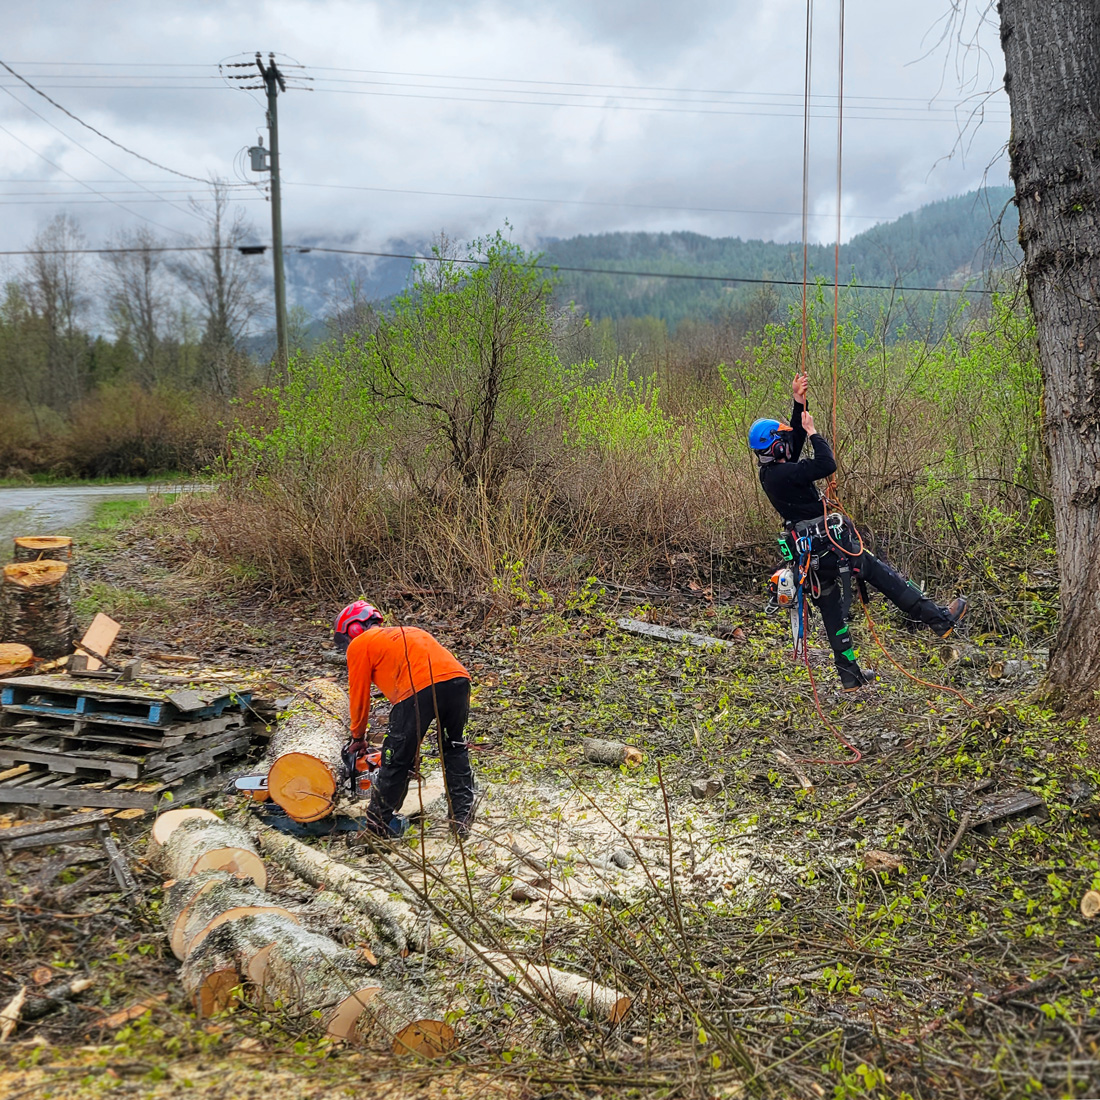 Garibaldi Tree care company employees performing a tree removal in Pemberton. It's a cloudy day. One worker is harnessed to the tree and another is cutting up wood.